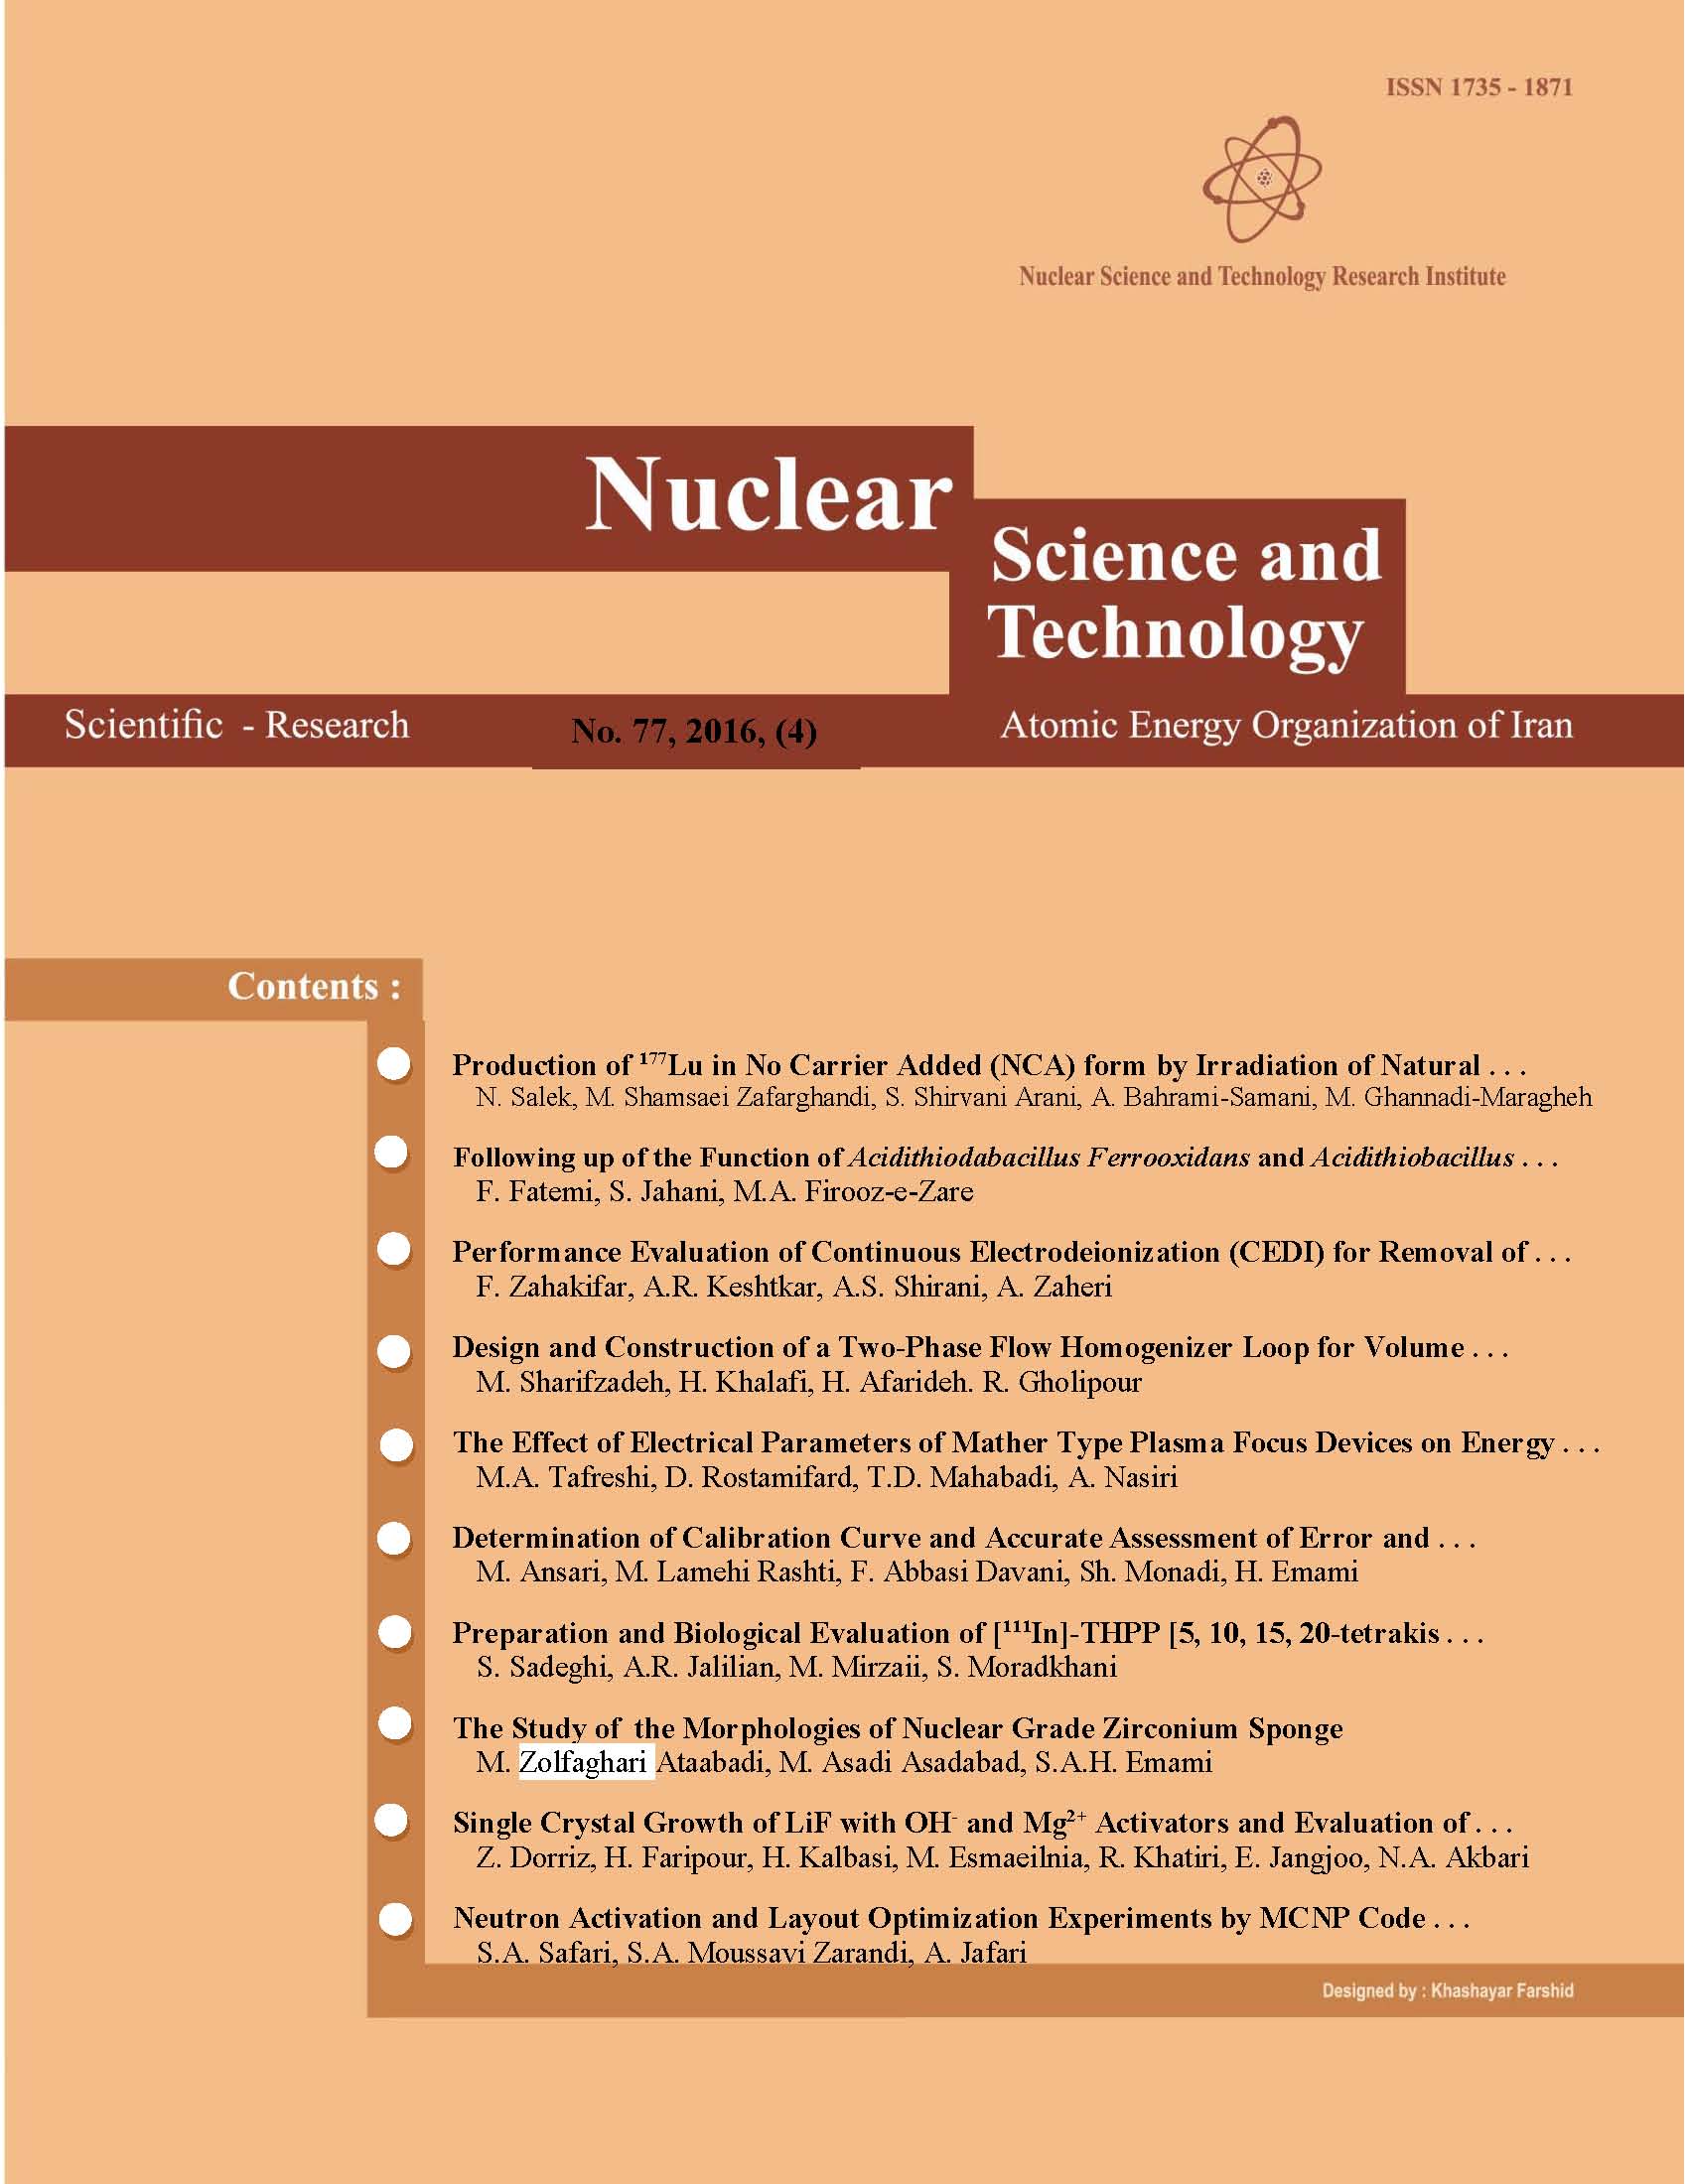 Journal of Nuclear Science, Engineering and Technology (JONSAT)